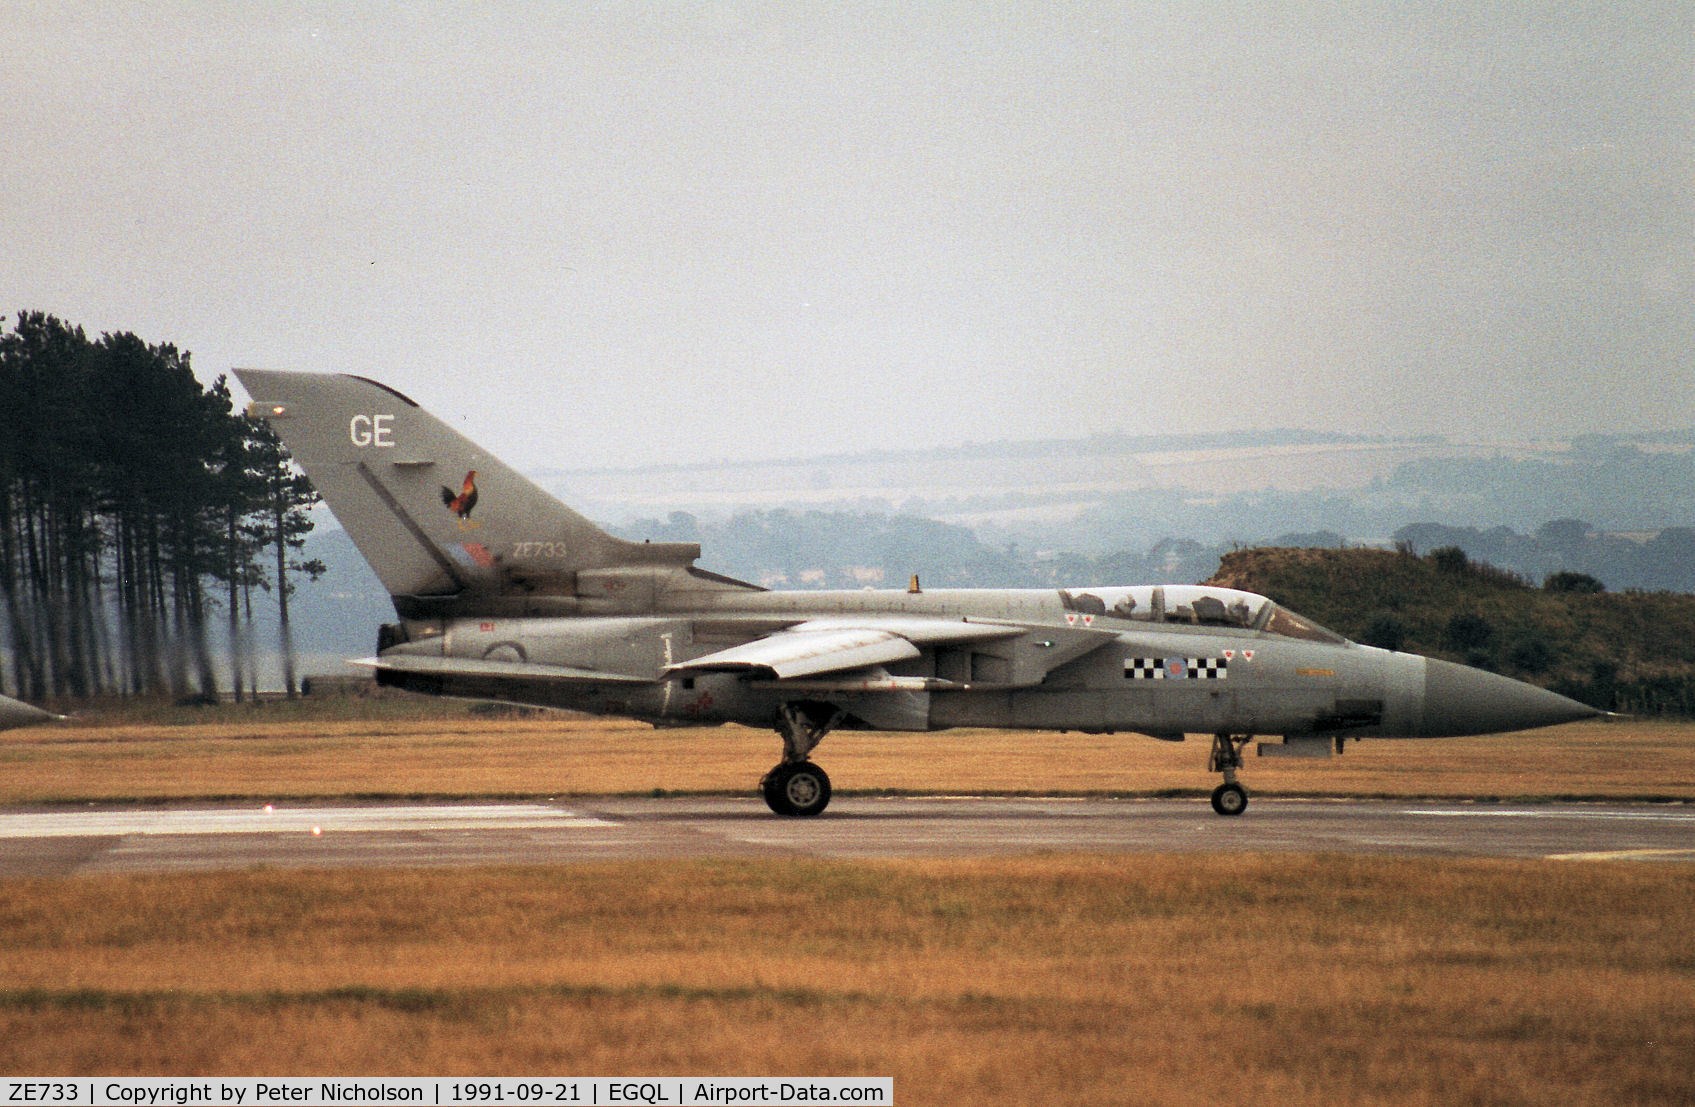 ZE733, 1987 Panavia Tornado F.3 C/N AS049/662/3297, Tornado F.3 of 43 Squadron lining up for take-off at the 1991 RAF Leuchars Airshow.